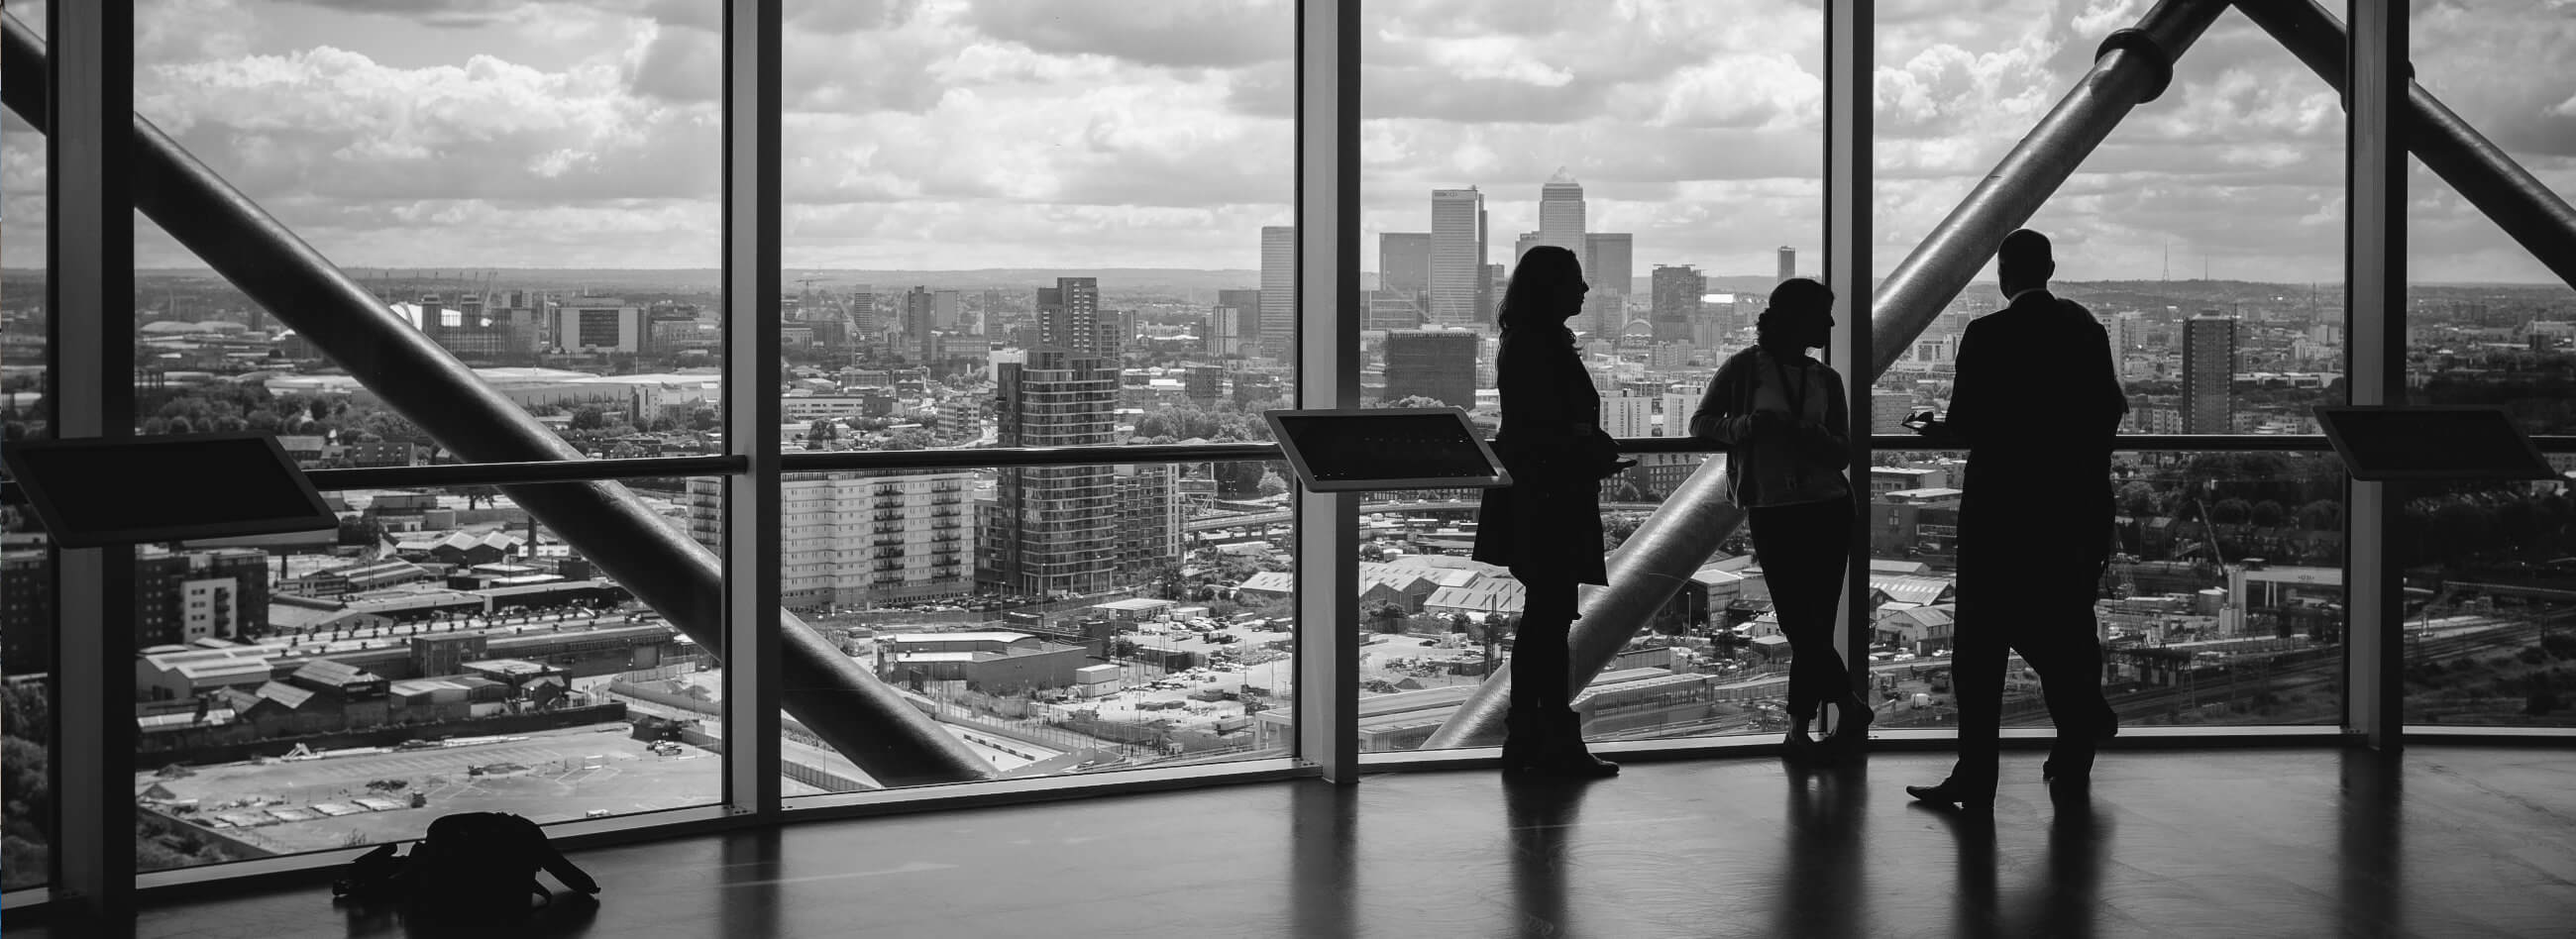 three people overlooking the city from inside a glass wall building